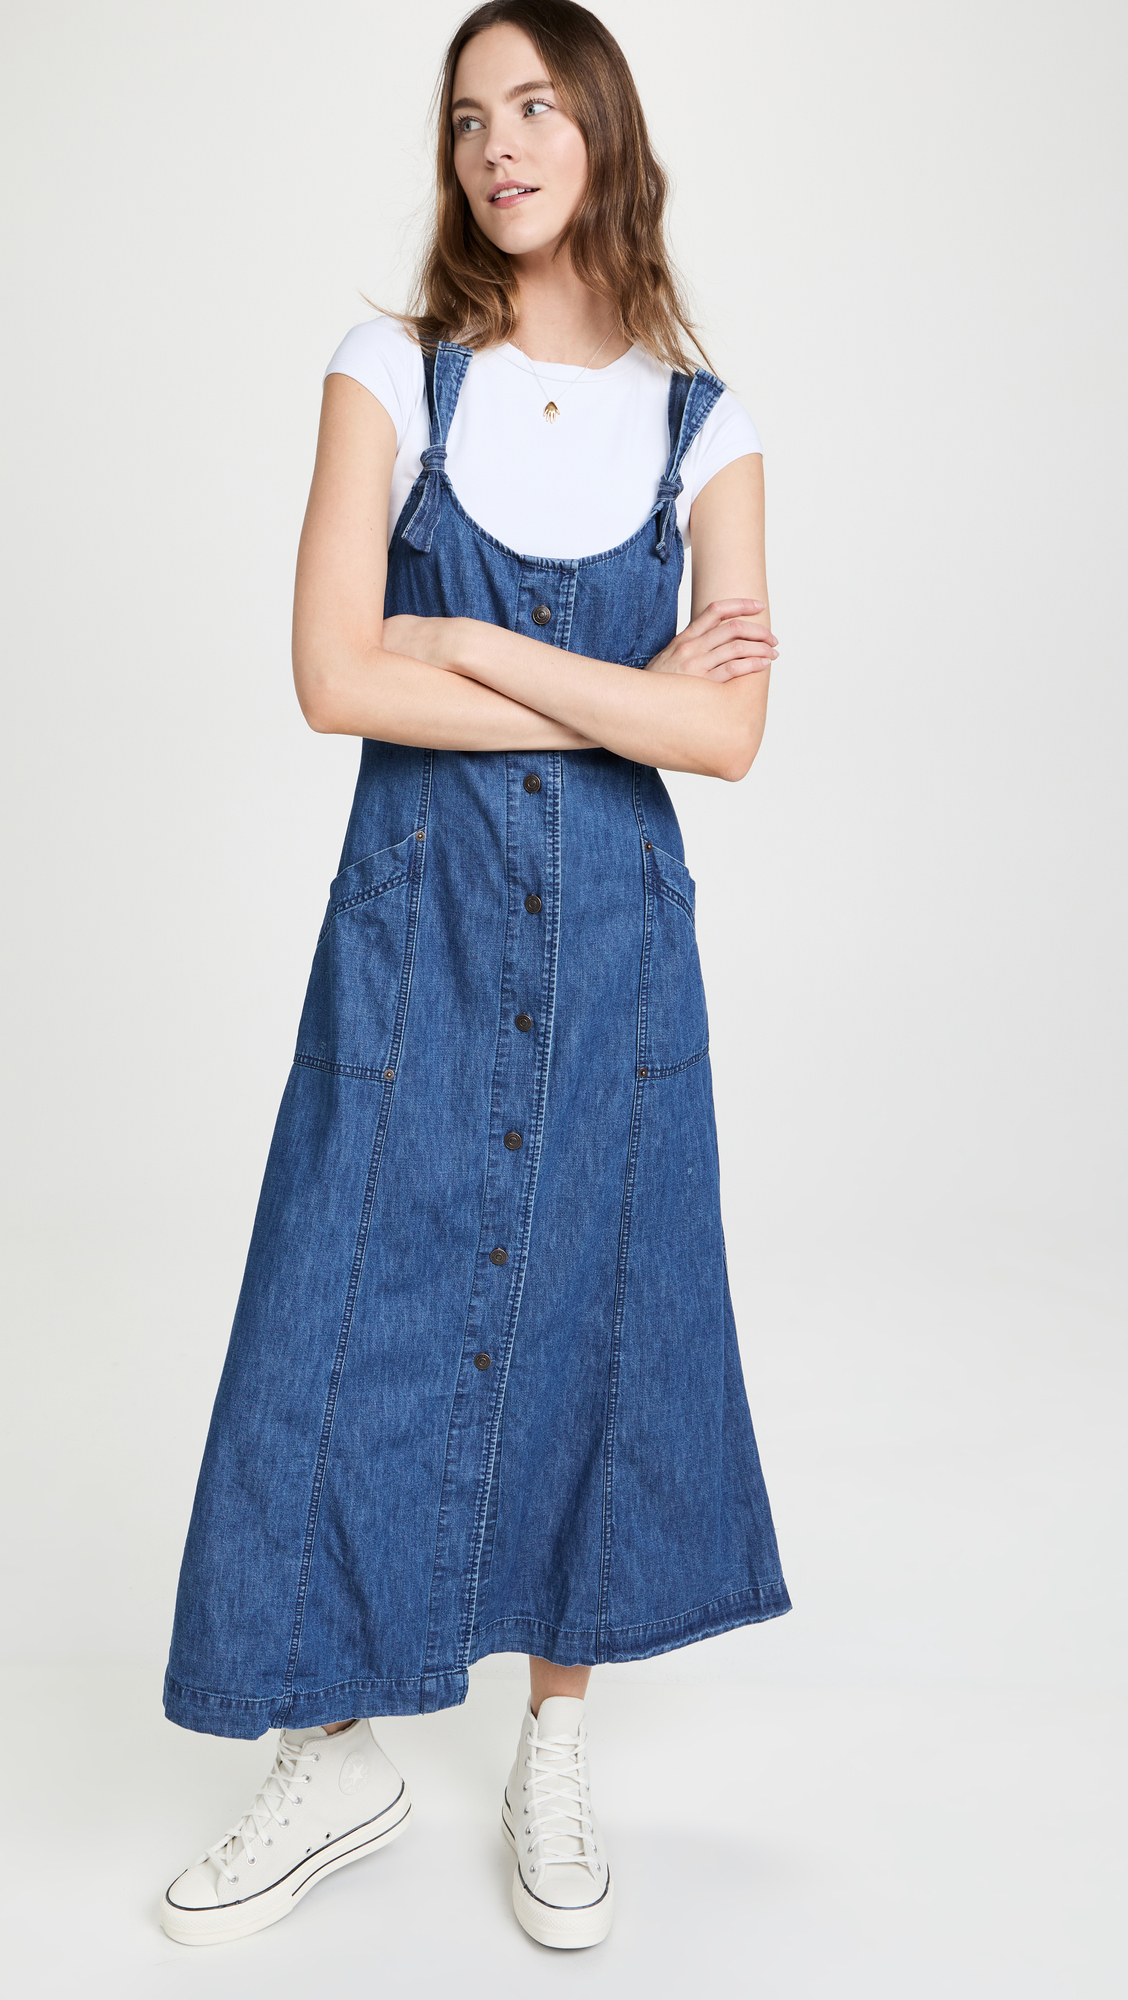 Free People Time After Time Denim Dress